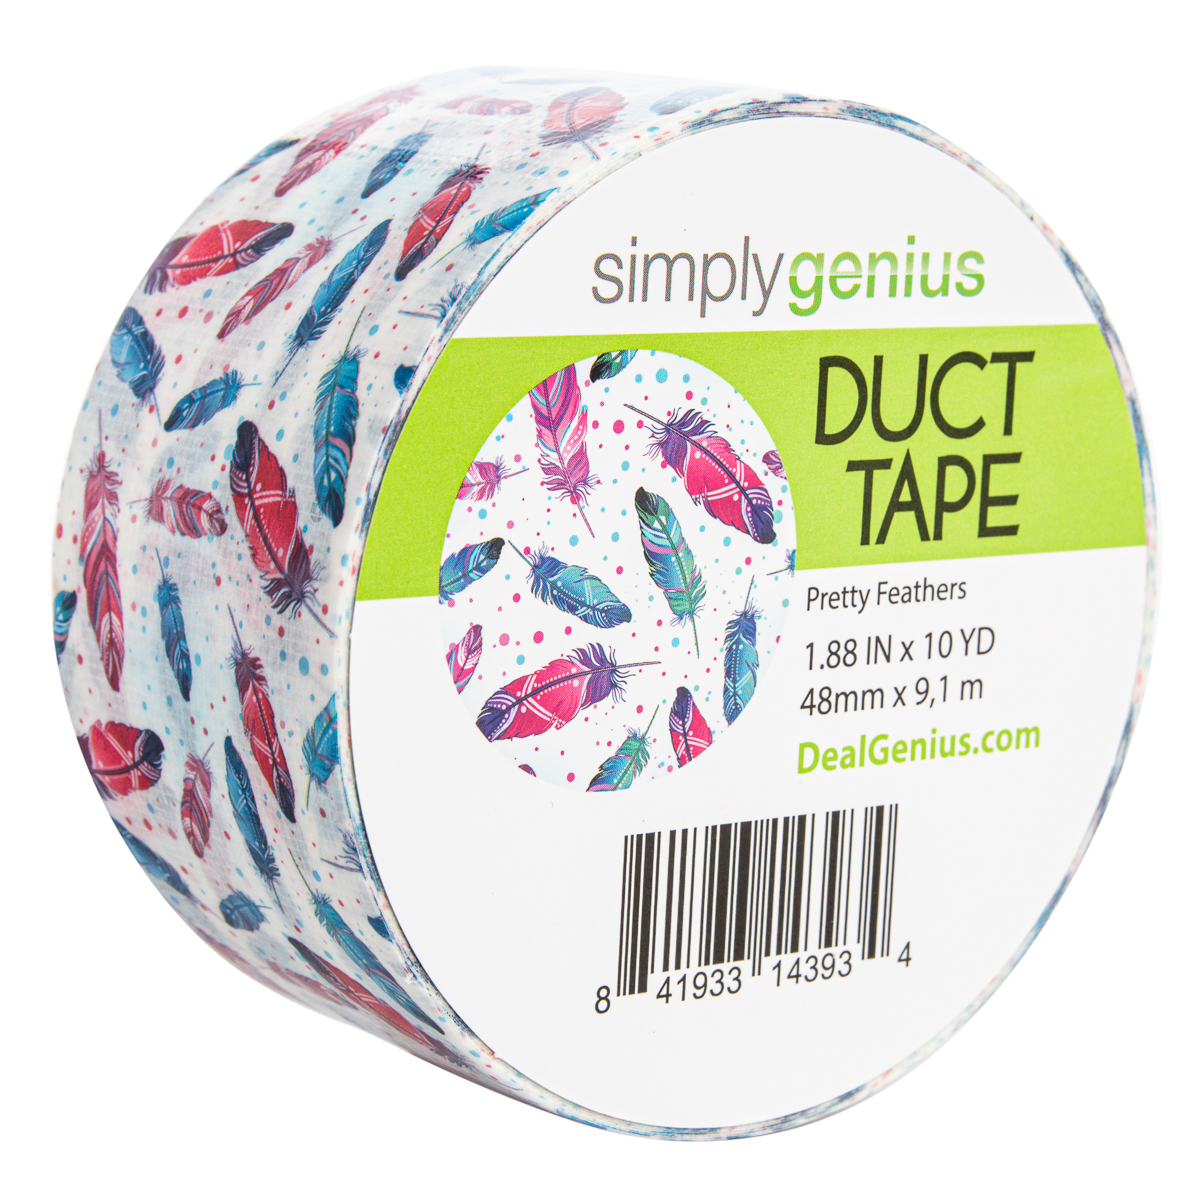 Simply Genius Craft Duct Tape Roll with Colors and Patterns, Pretty Feathers